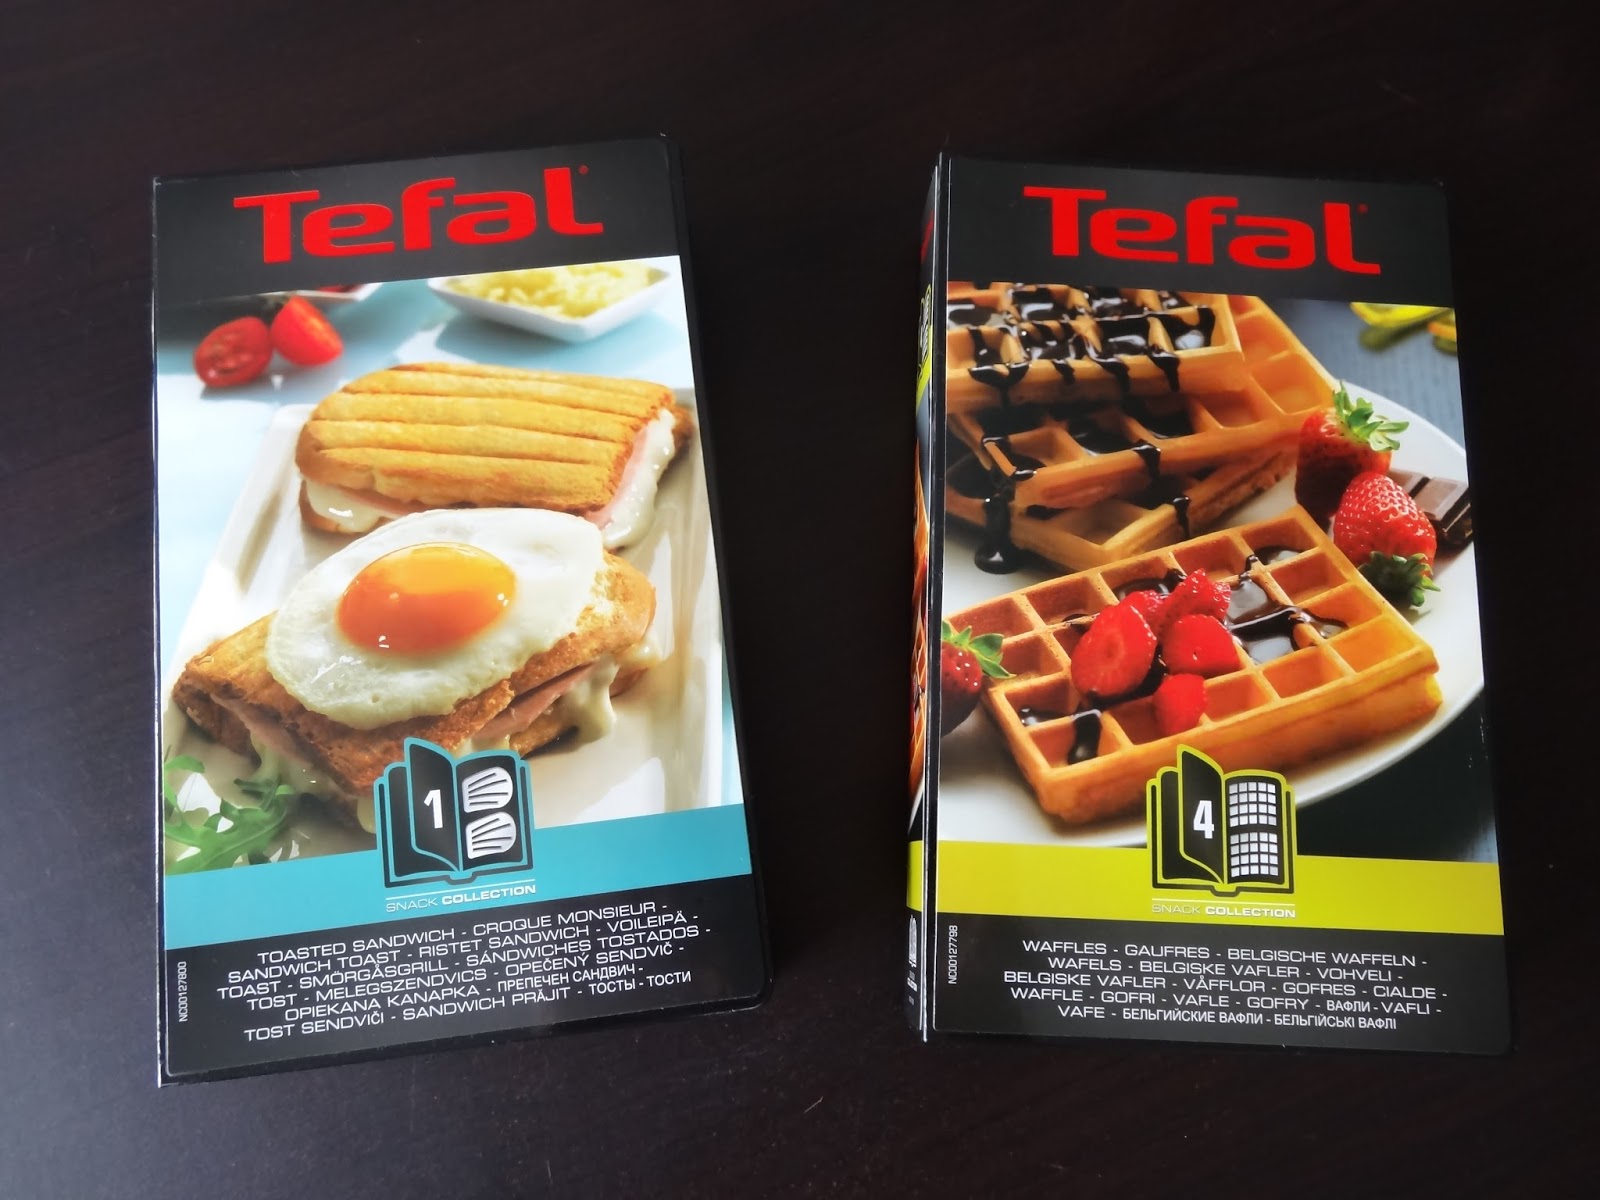 Snack Collection Waffles + Toasted Sandwich, CROQUE-MONSIEUR ET GAUFRIERS